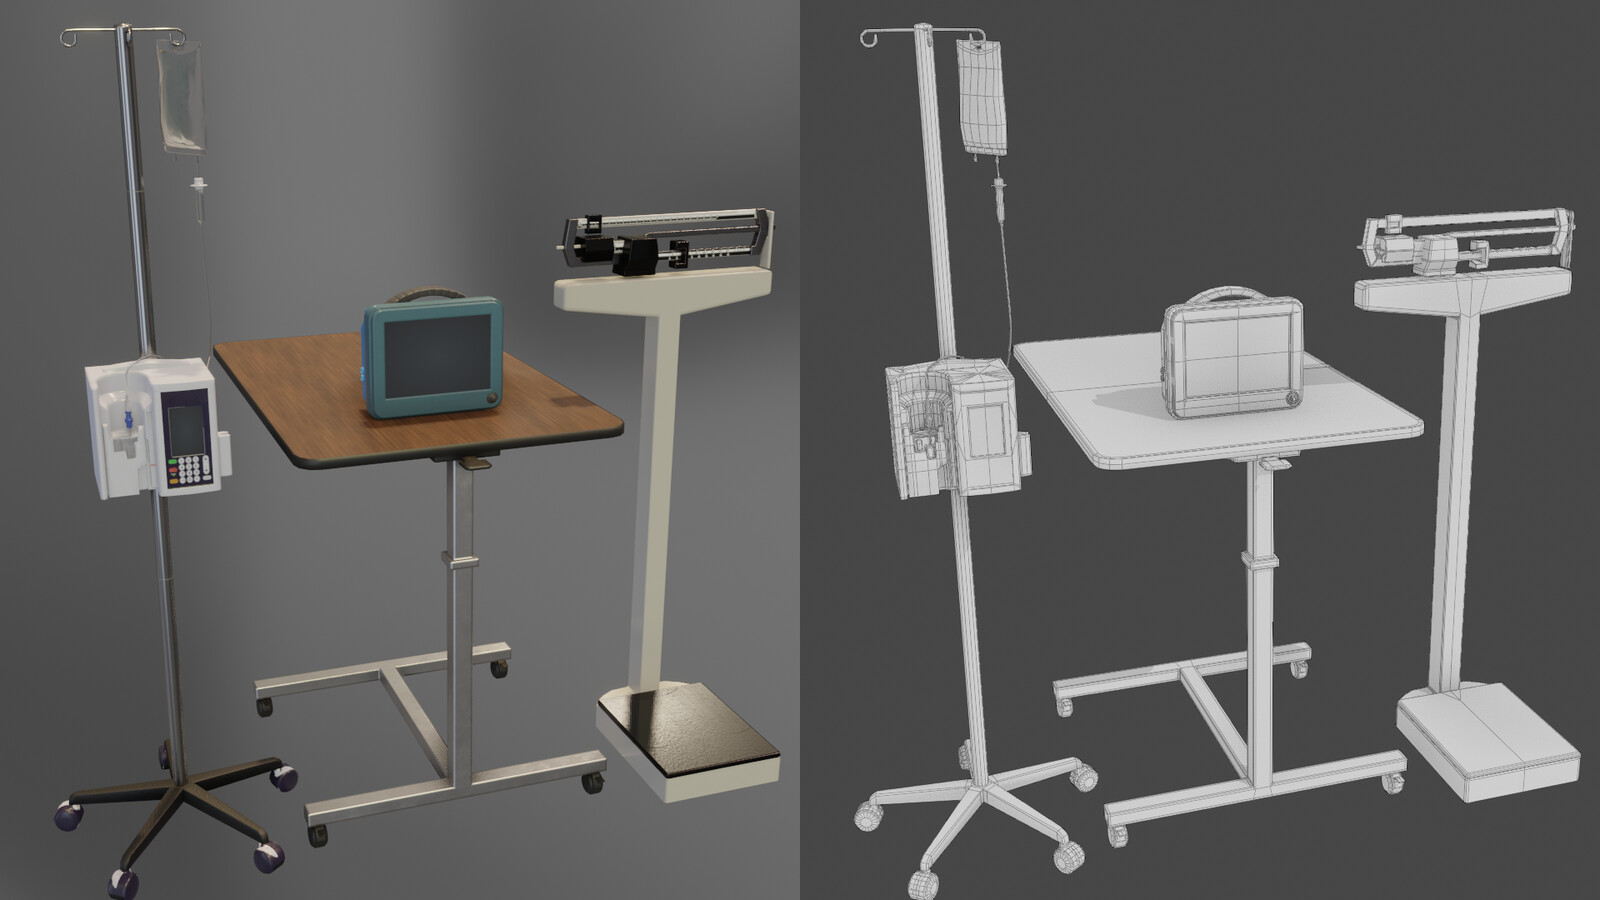 IV Stand, Table, Monitor, Scale